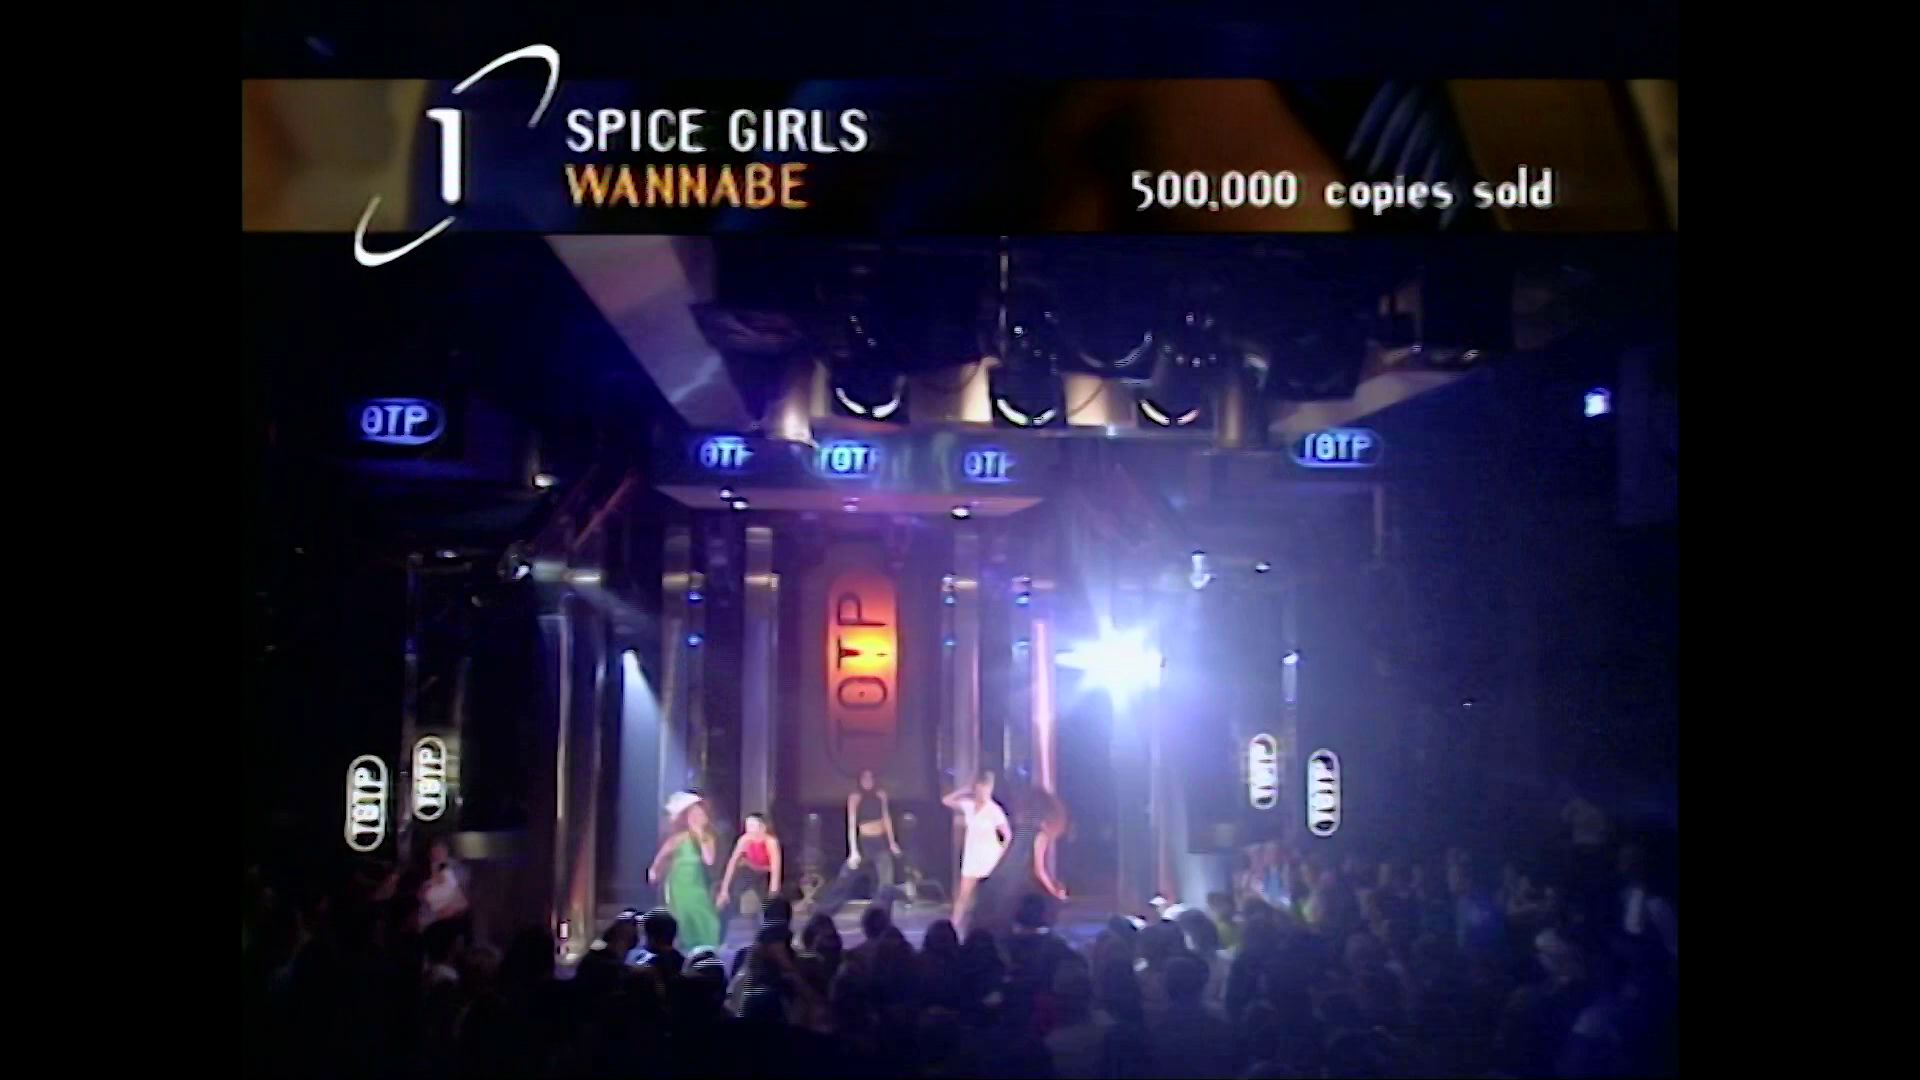 The Spice Girls at the BBC 2021 1080p